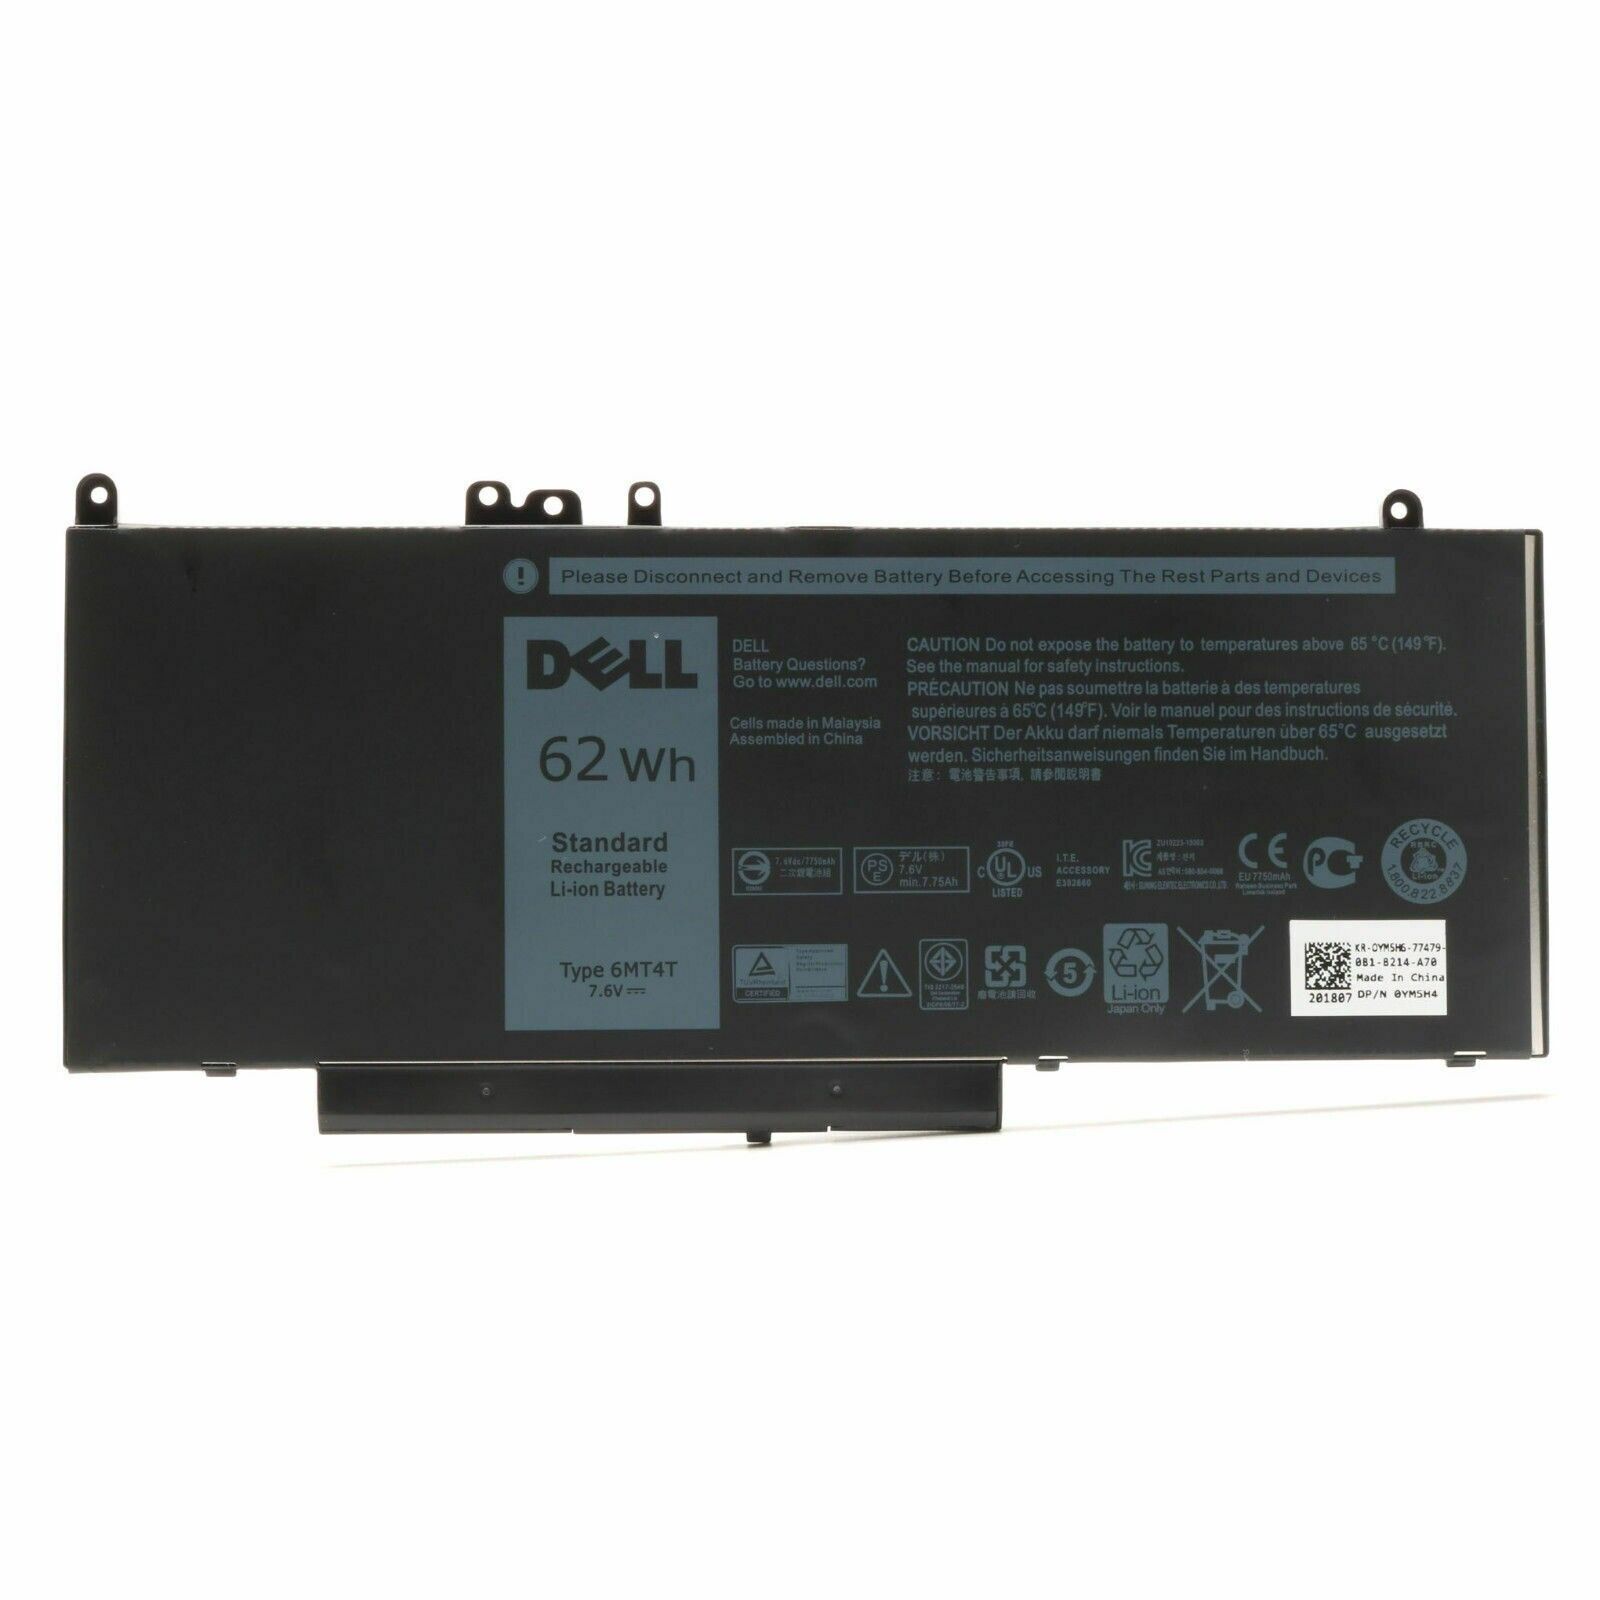 OEM 93FTF Battery For Dell Latitude 5280 5480 5580 5290 5490 D4CMT 4YFVG 51WH US